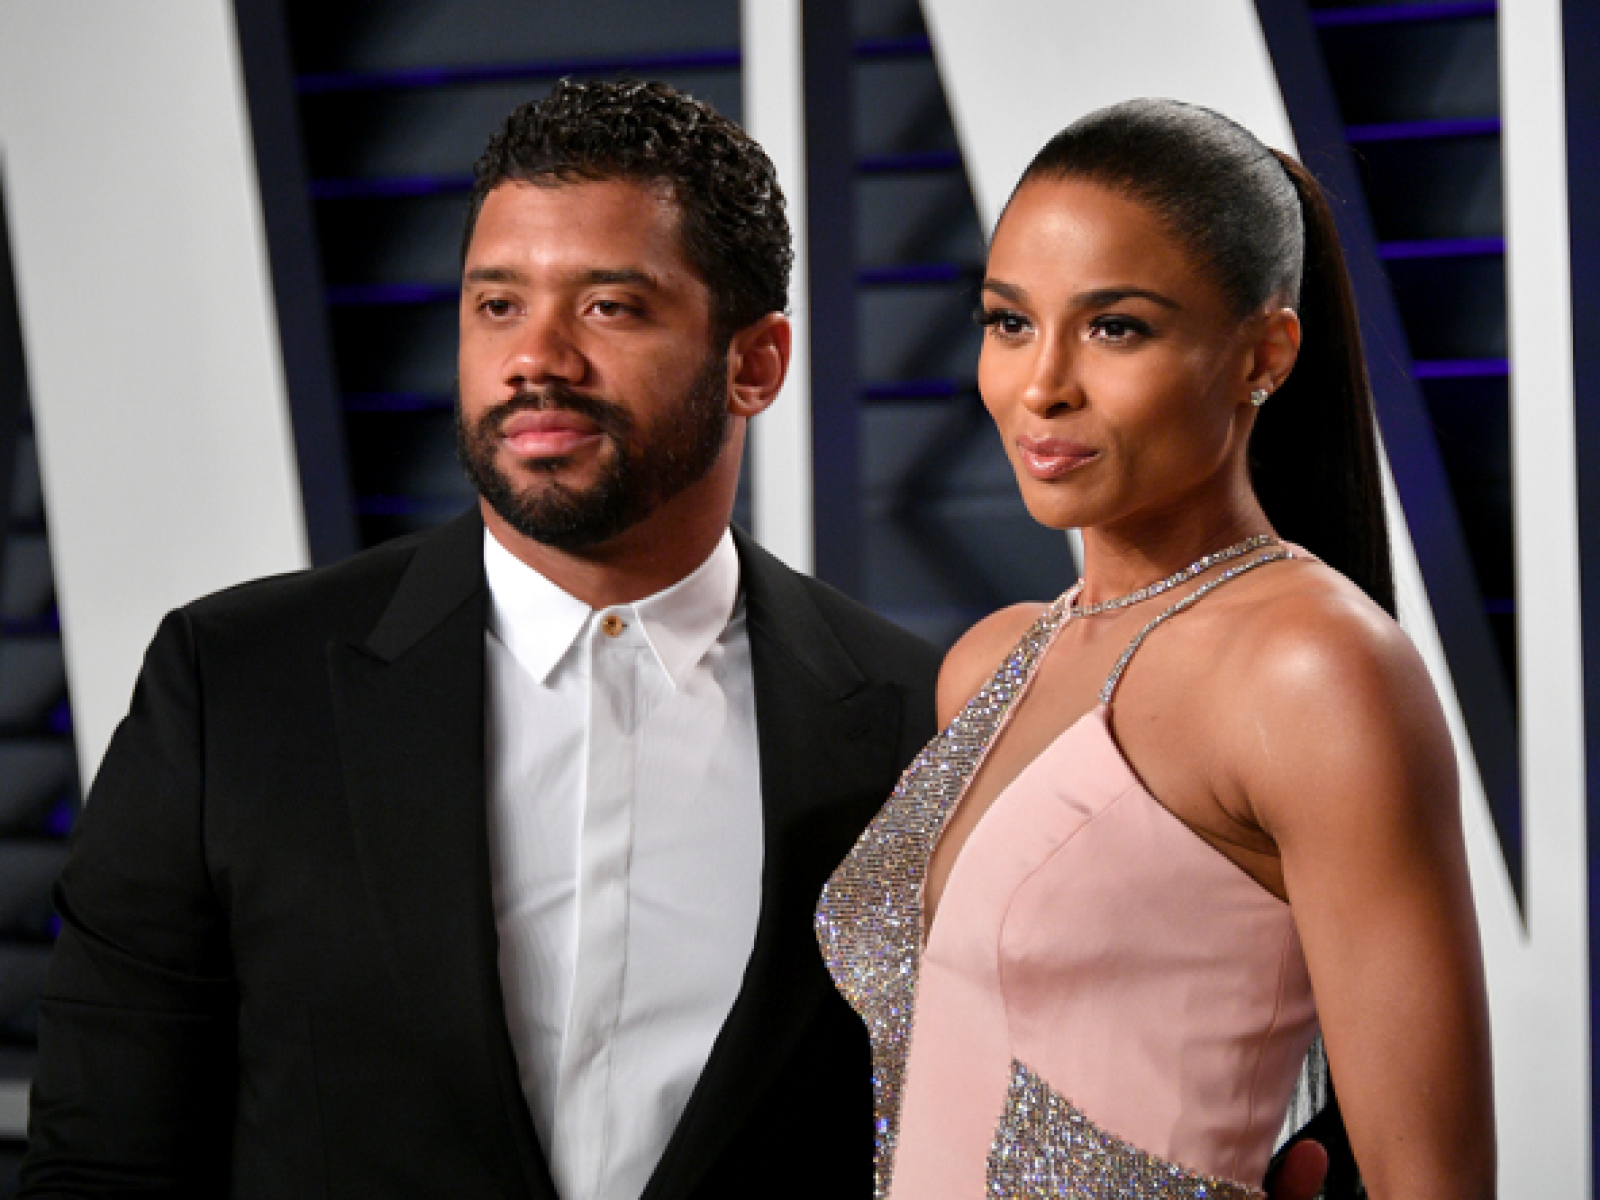 Who is ciara married too